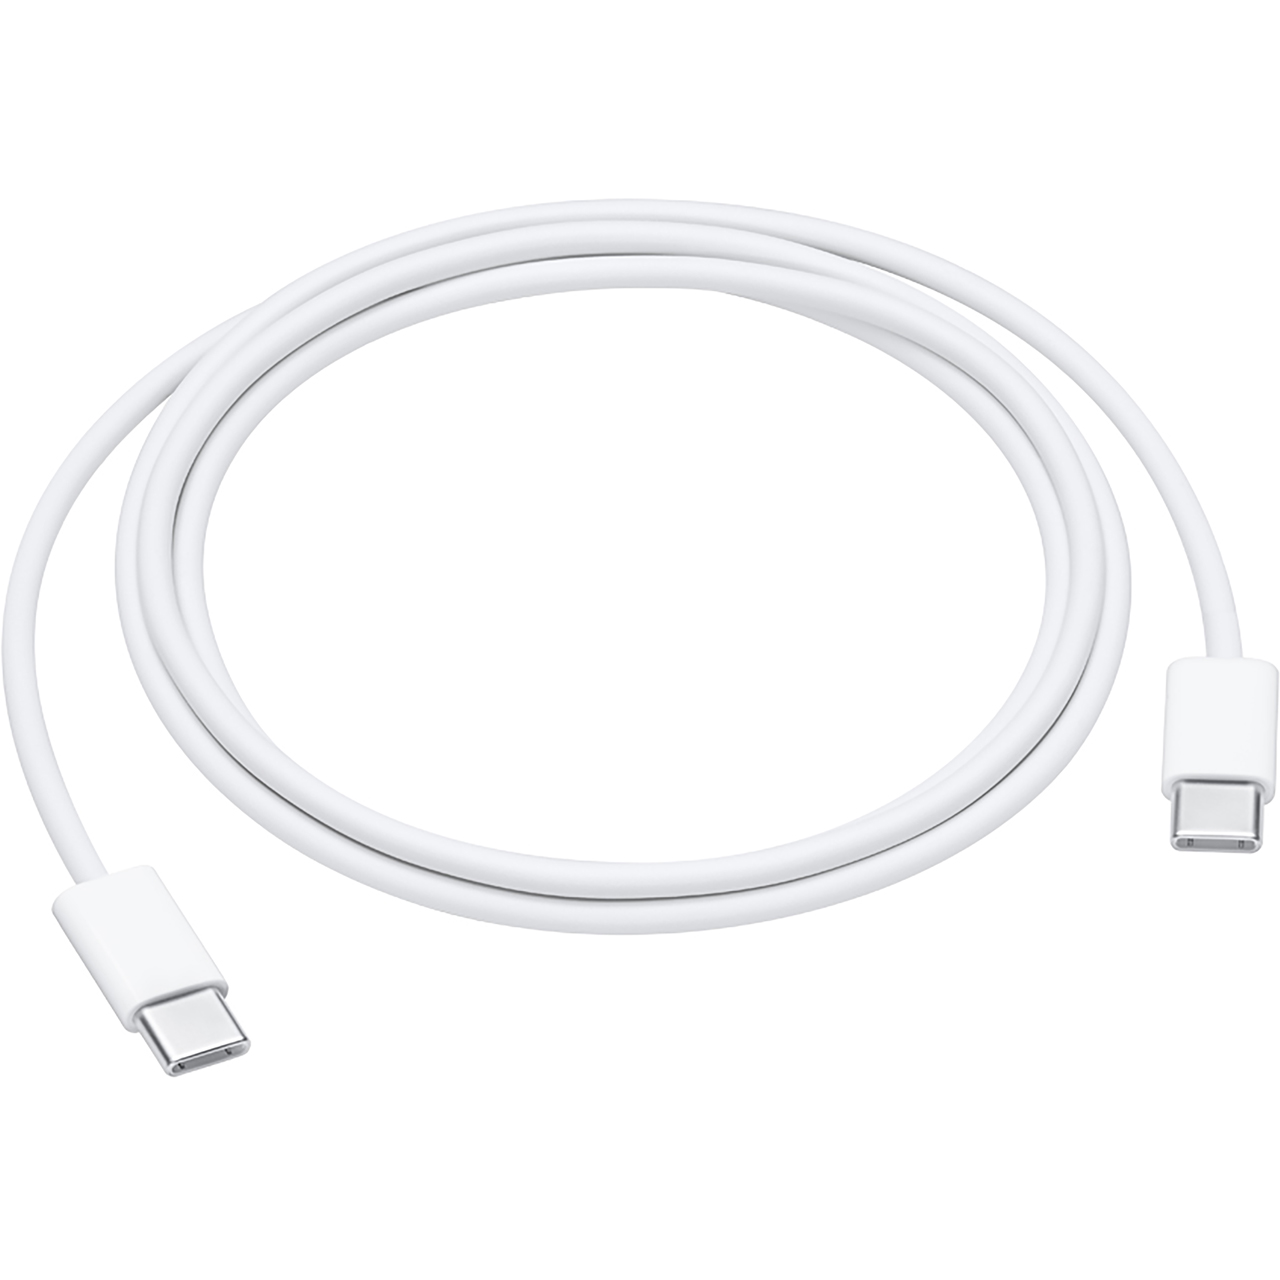 Apple USB-C Charge Cable (1 m) Review